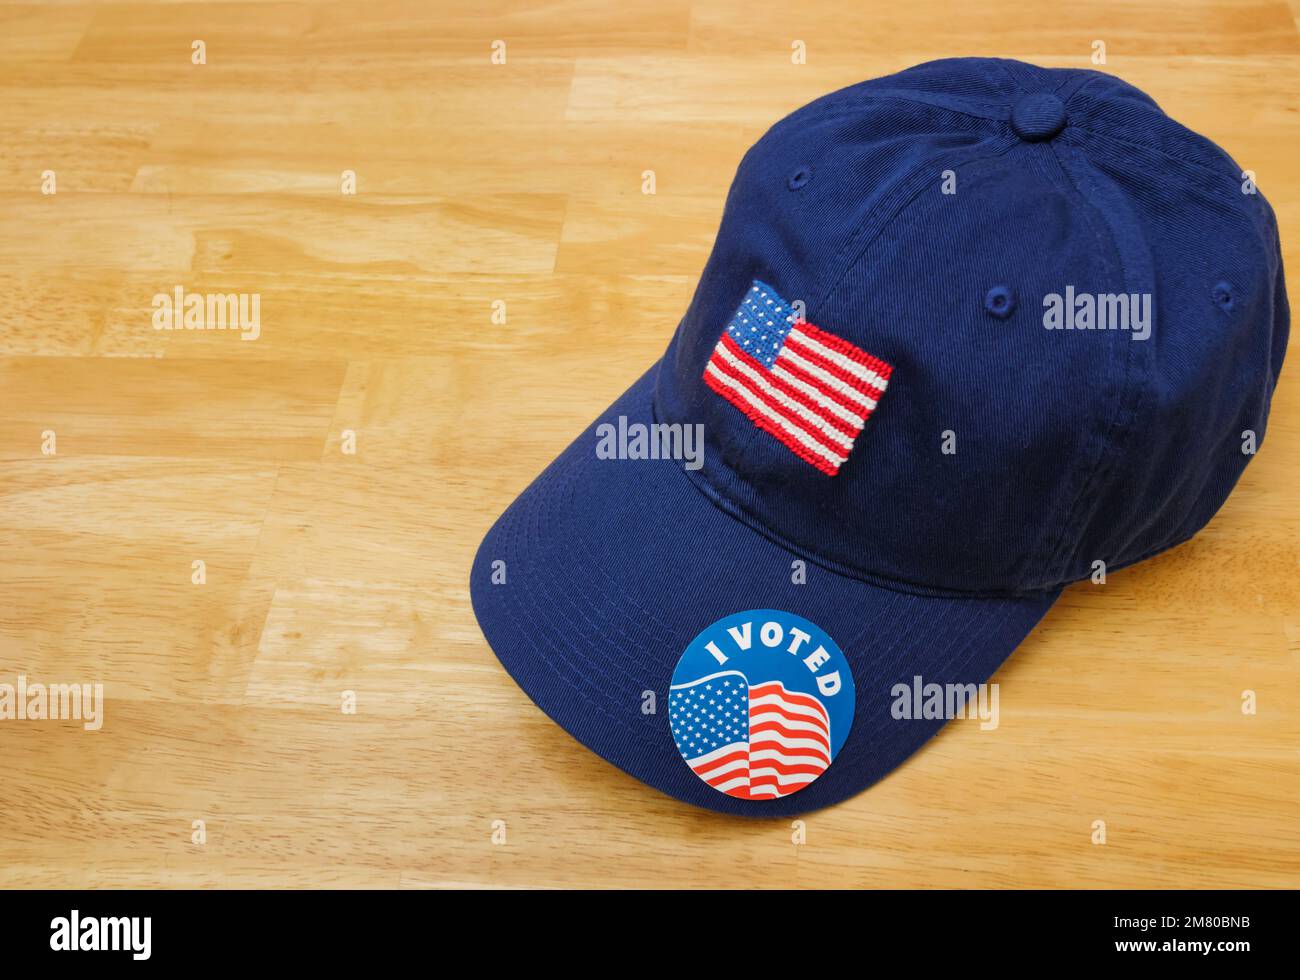 I Voted sticker on a patriotic blue baseball hat with American flag on wood background. Stock Photo